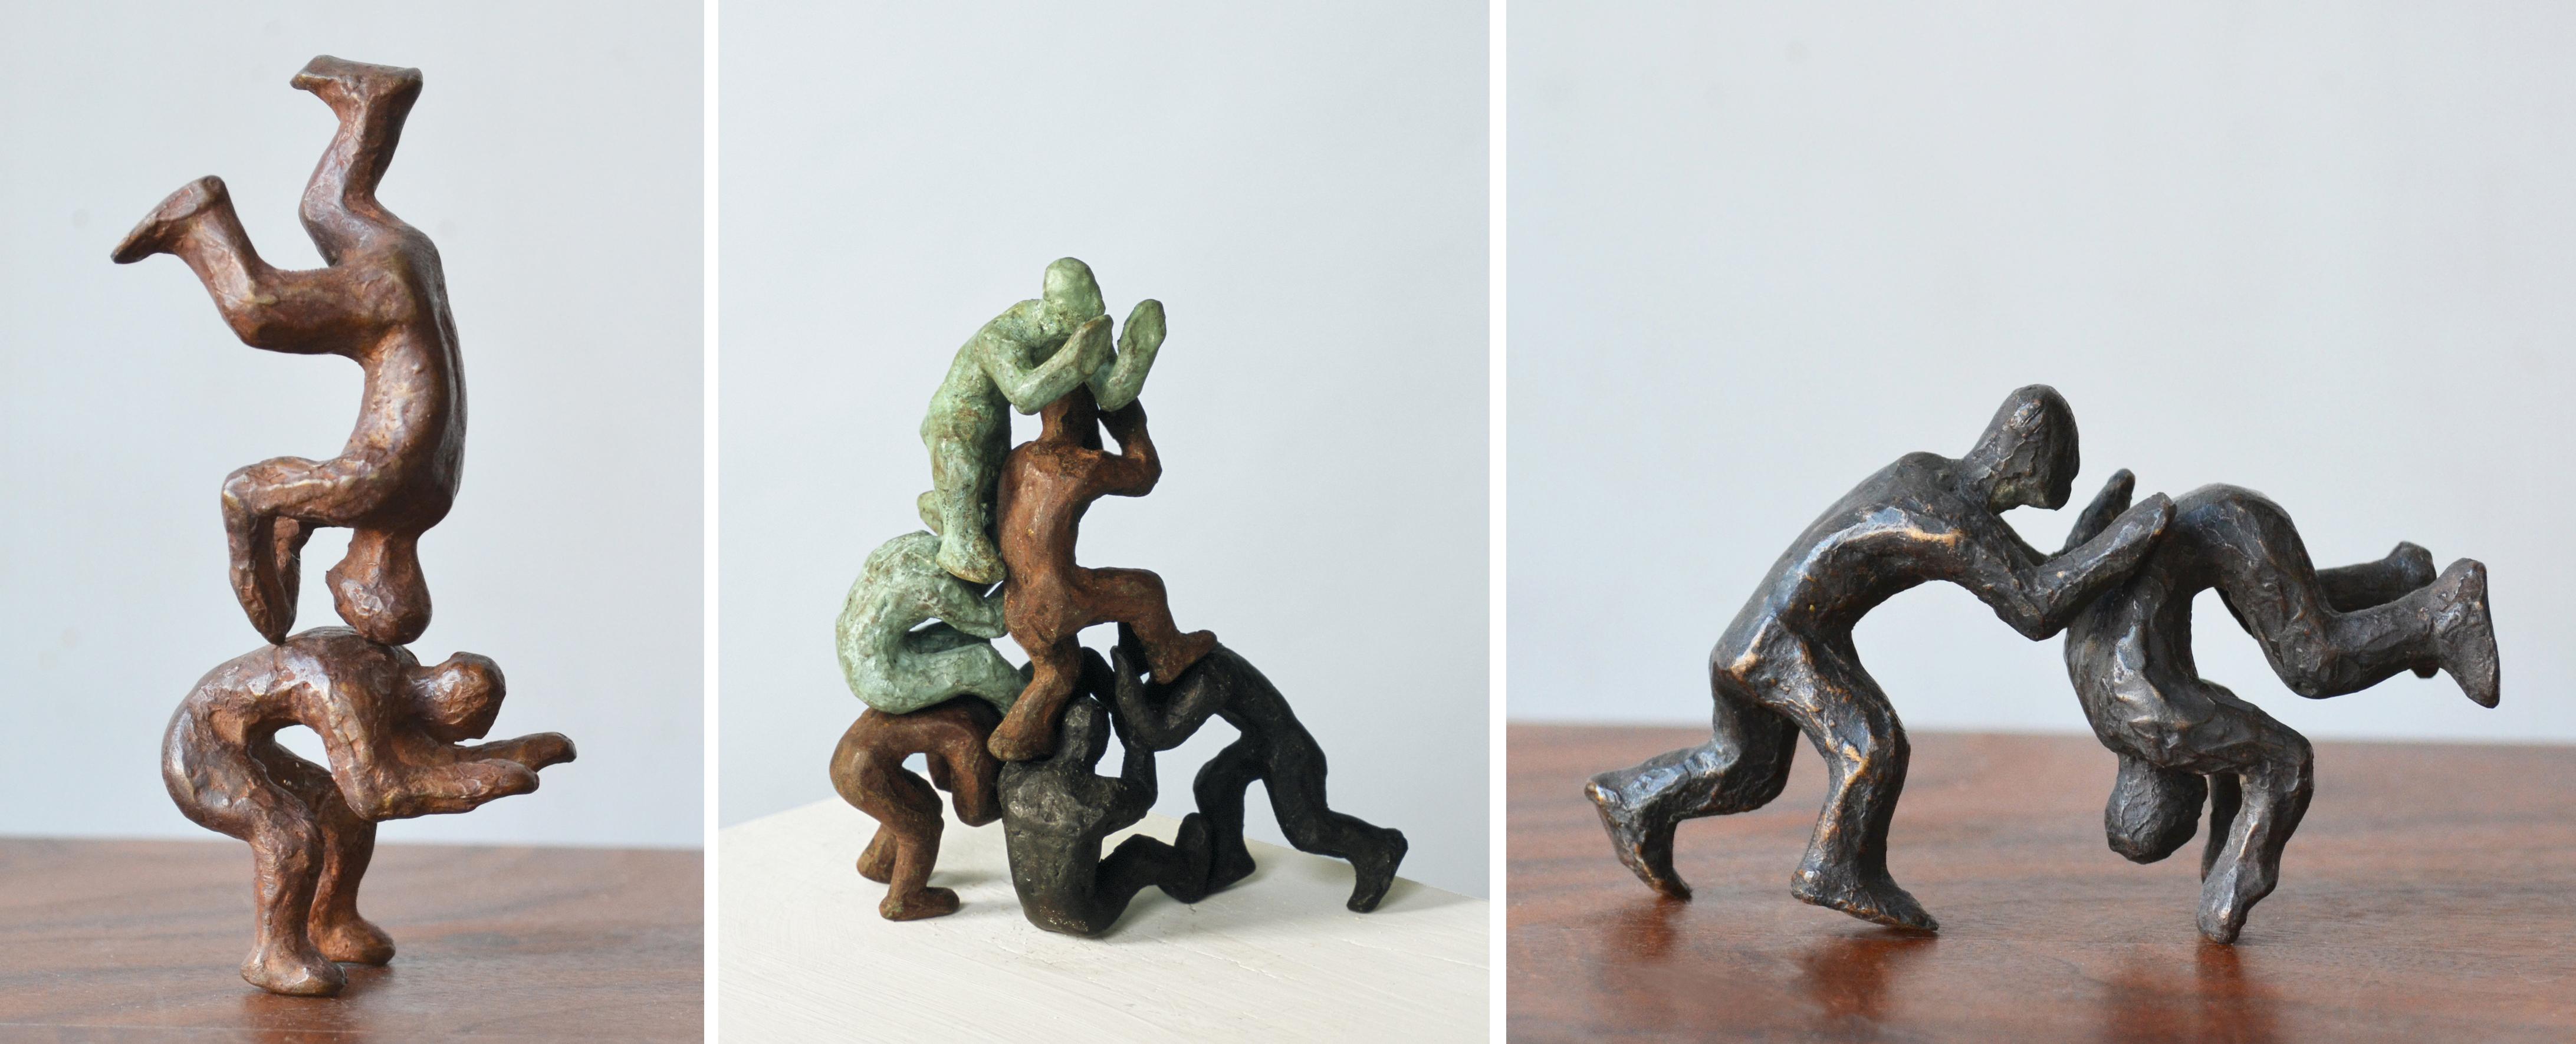 Noa Bornstein Figurative Sculpture - Why Fight When You Can Play? 3 Pairs interactive miniature bronze figures 